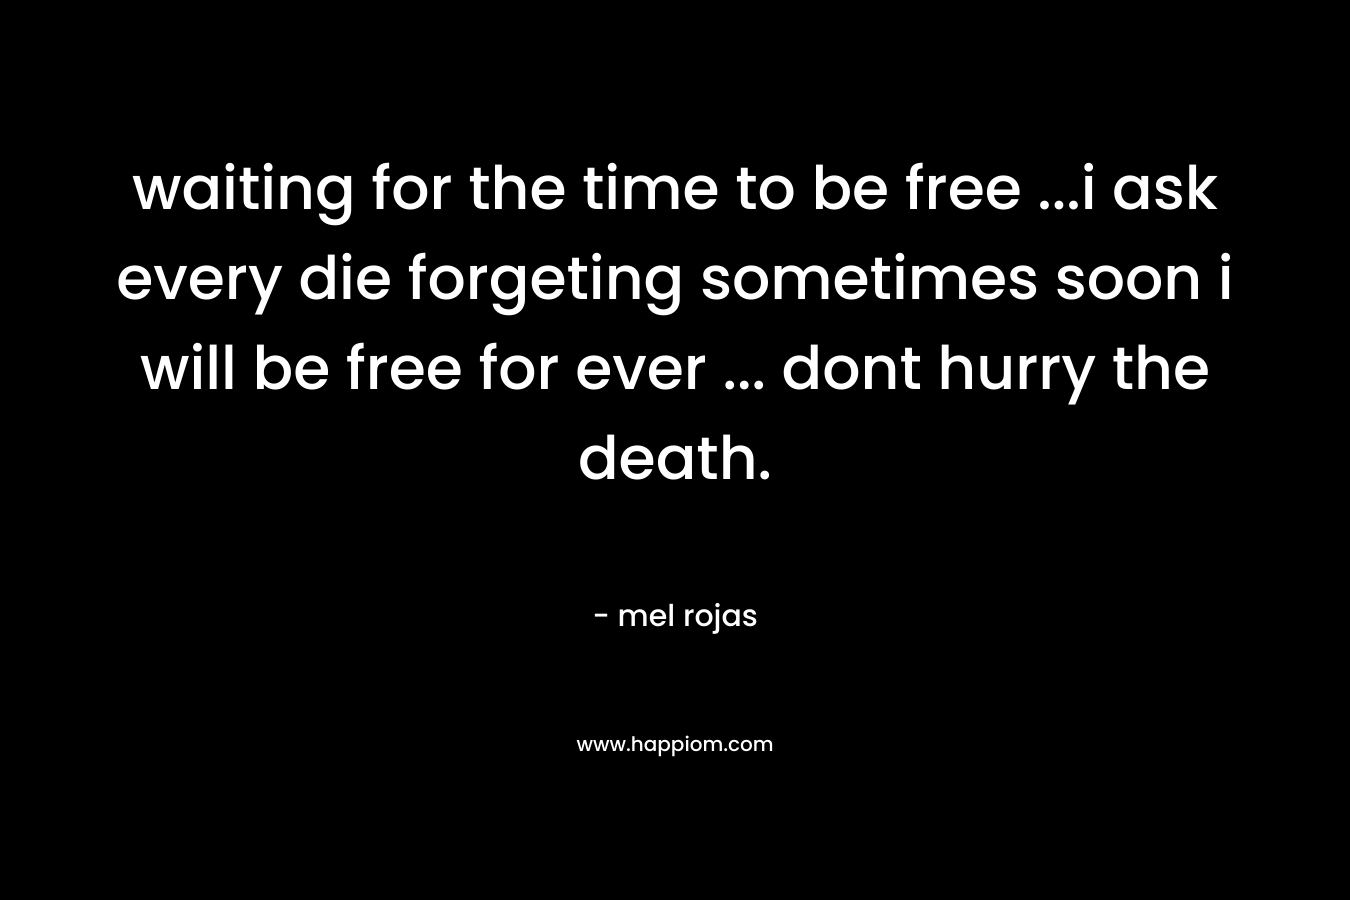 waiting for the time to be free ...i ask every die forgeting sometimes soon i will be free for ever ... dont hurry the death.